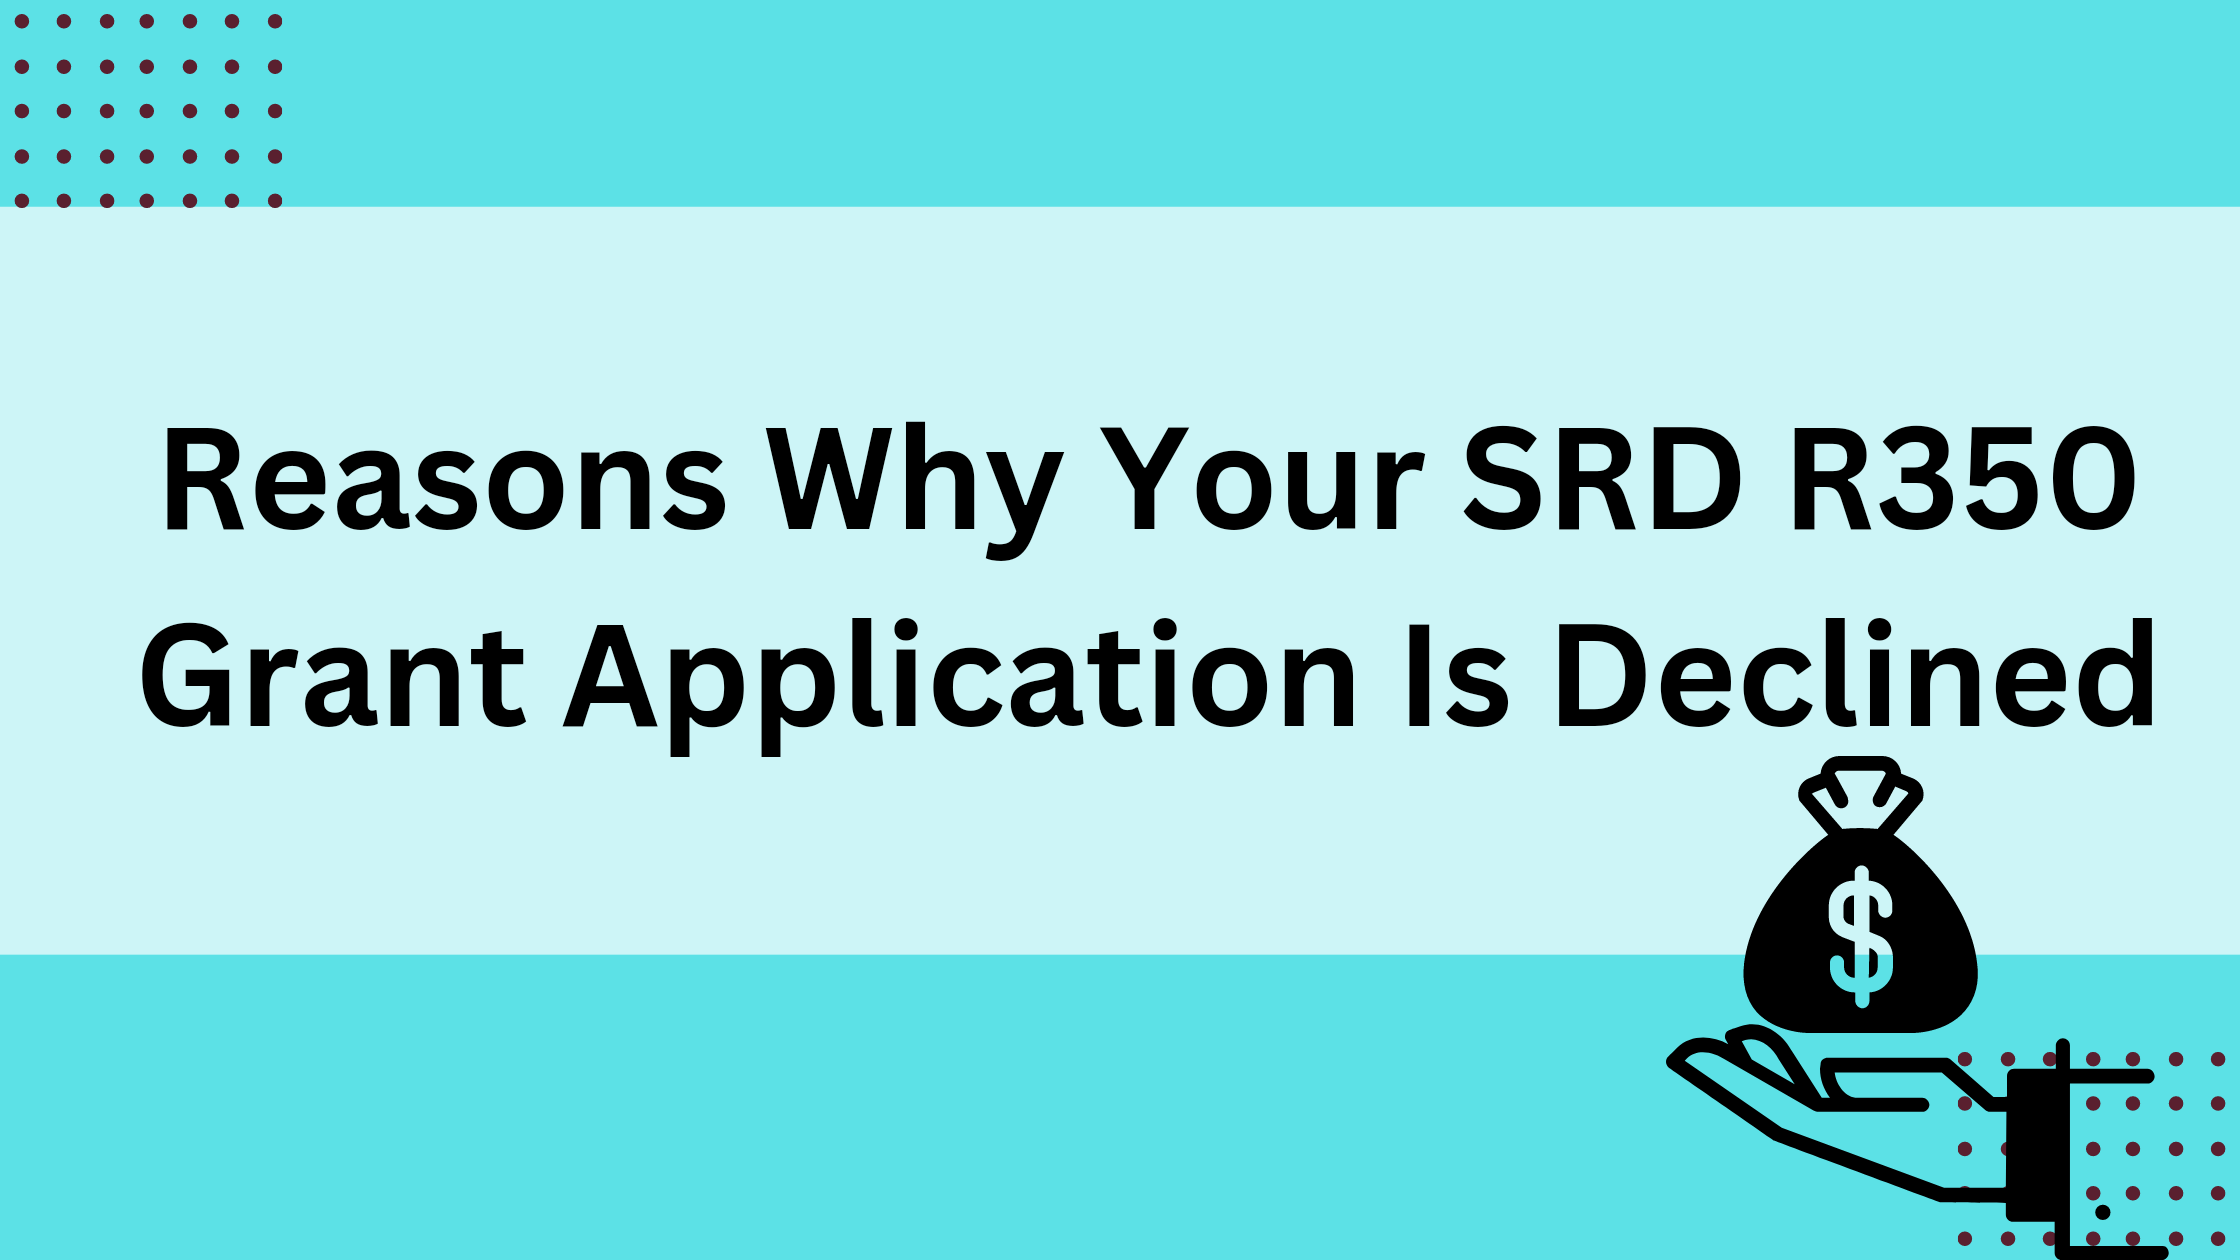 Reasons Why Your SRD R350 Grant Application Is Declined